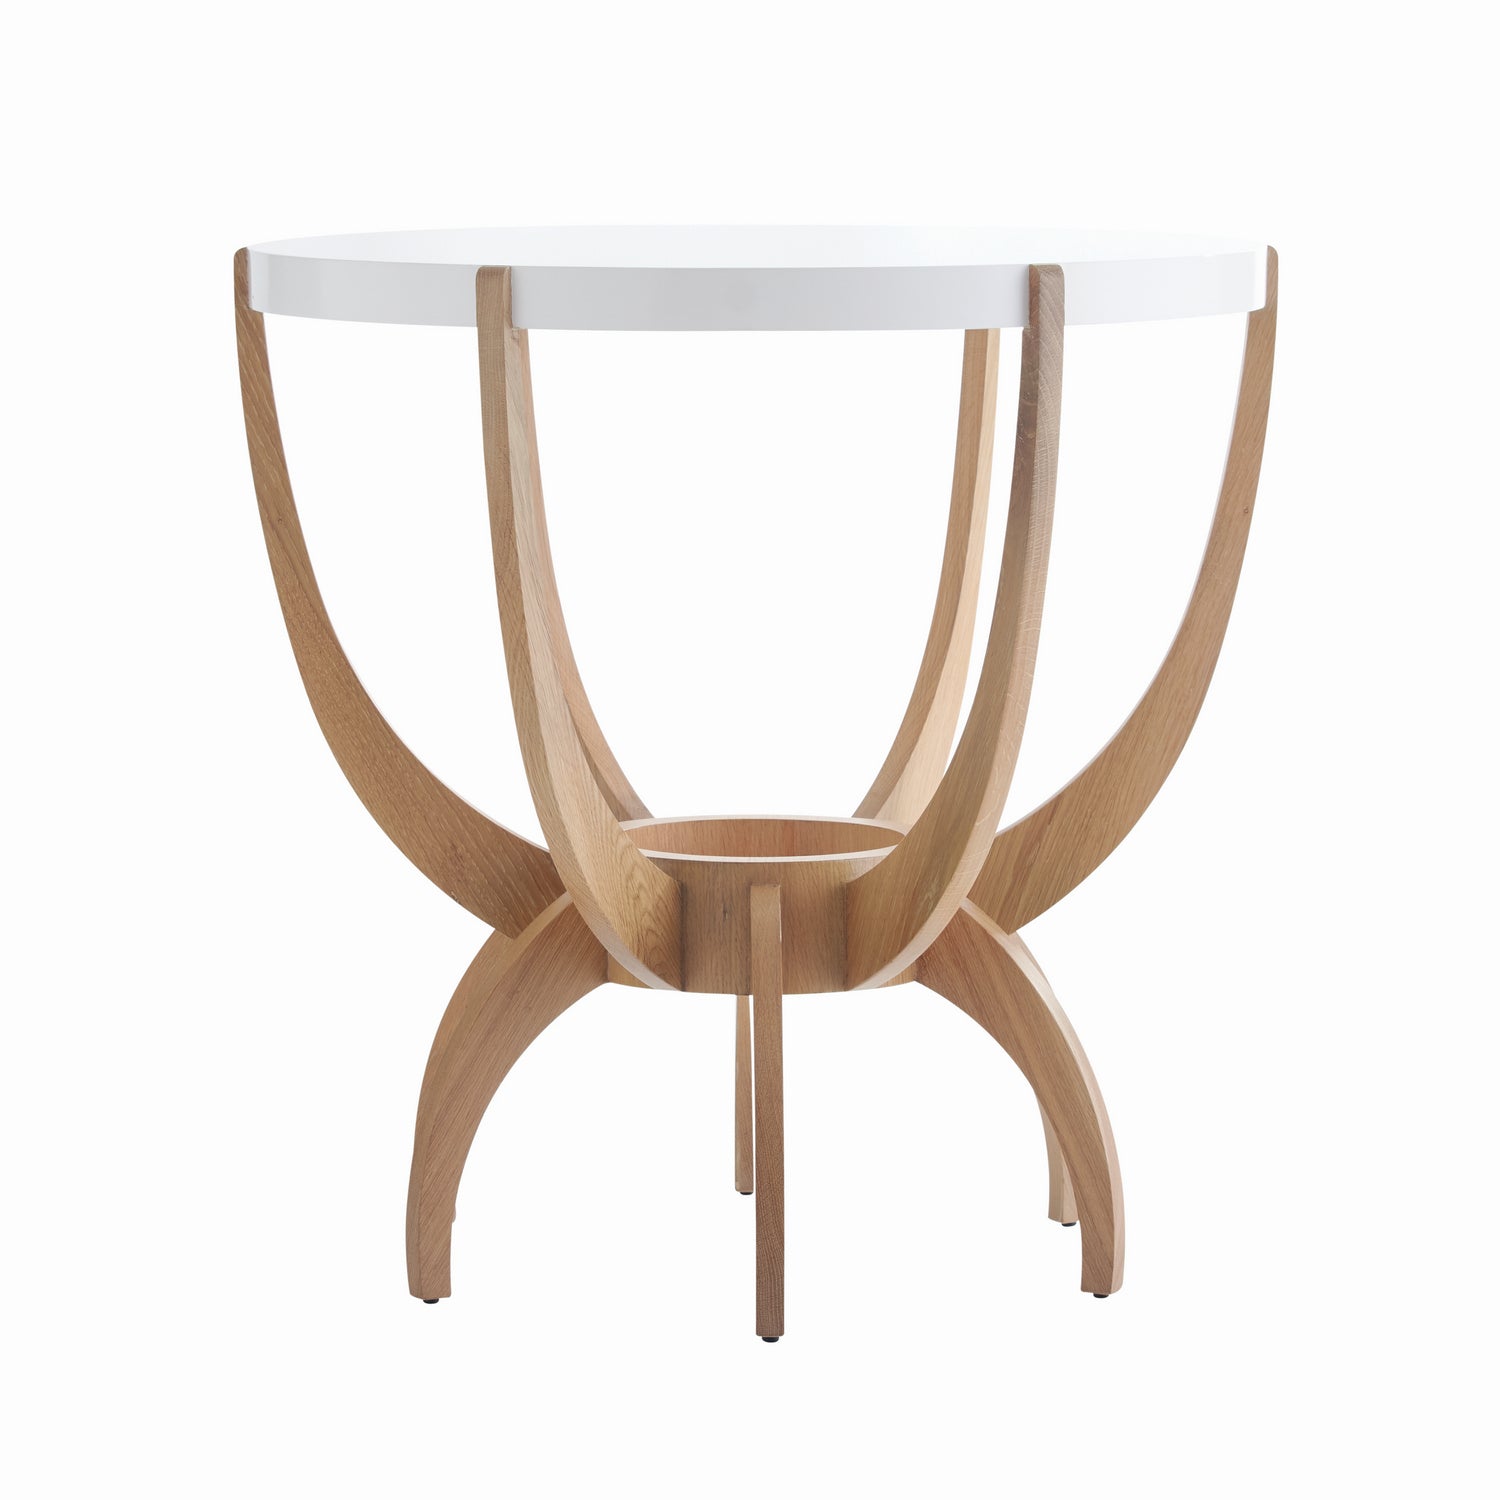 Side Table from the Nia collection in White finish